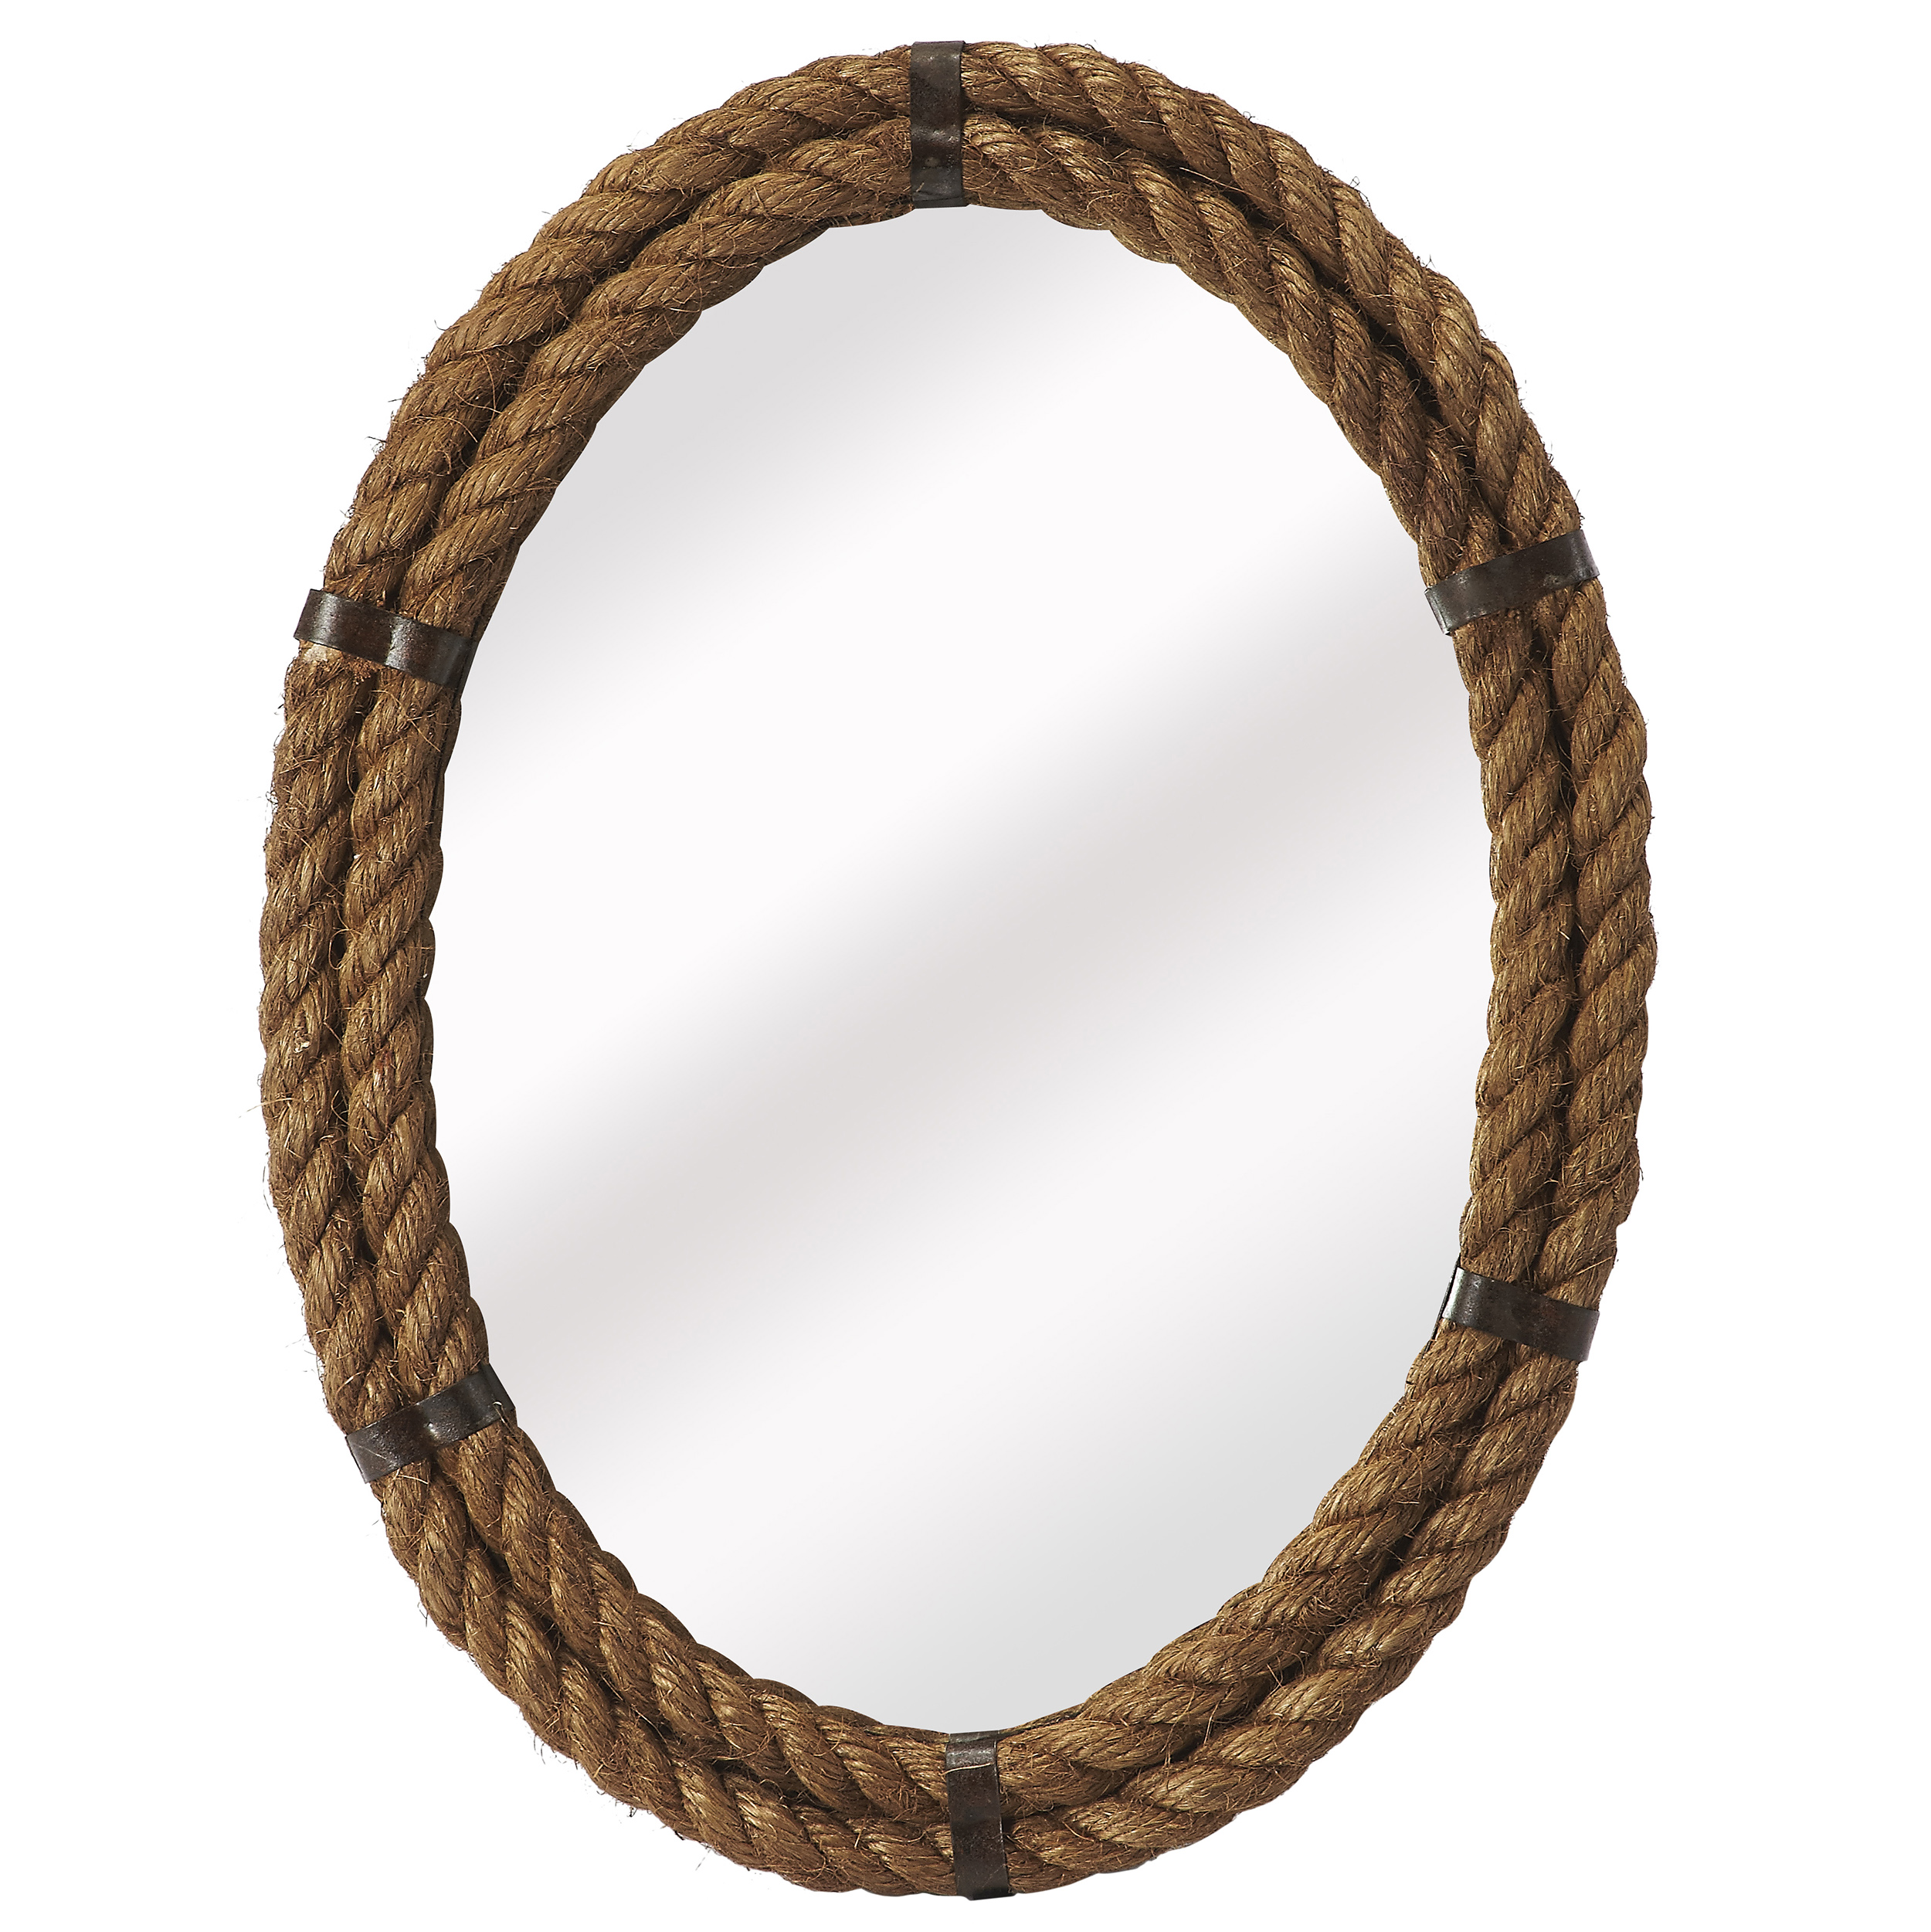 Sorrento Oval Rope Wall Mirror, Natural